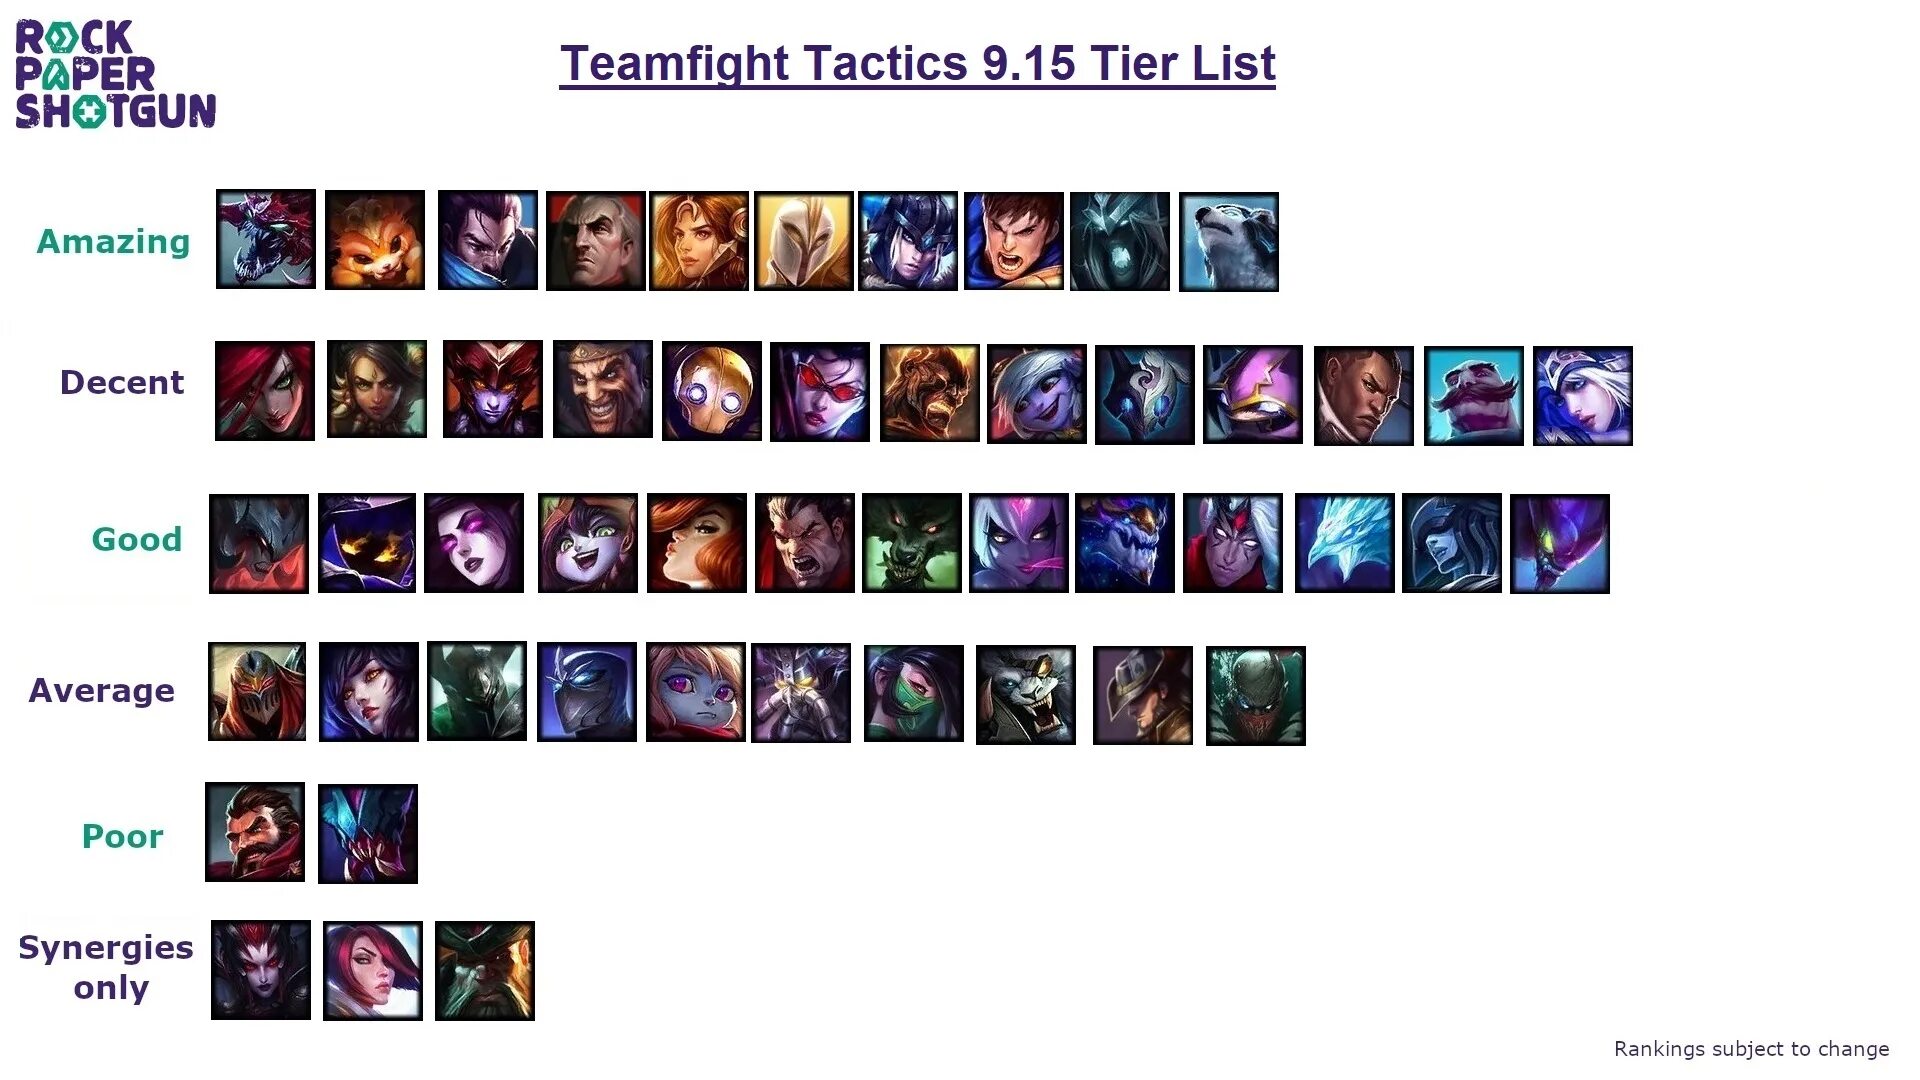 List archived. Ранги ТФТ. Новый тир лист парагона. Project menacing Tier list. Heroes of the Storm Tier list.